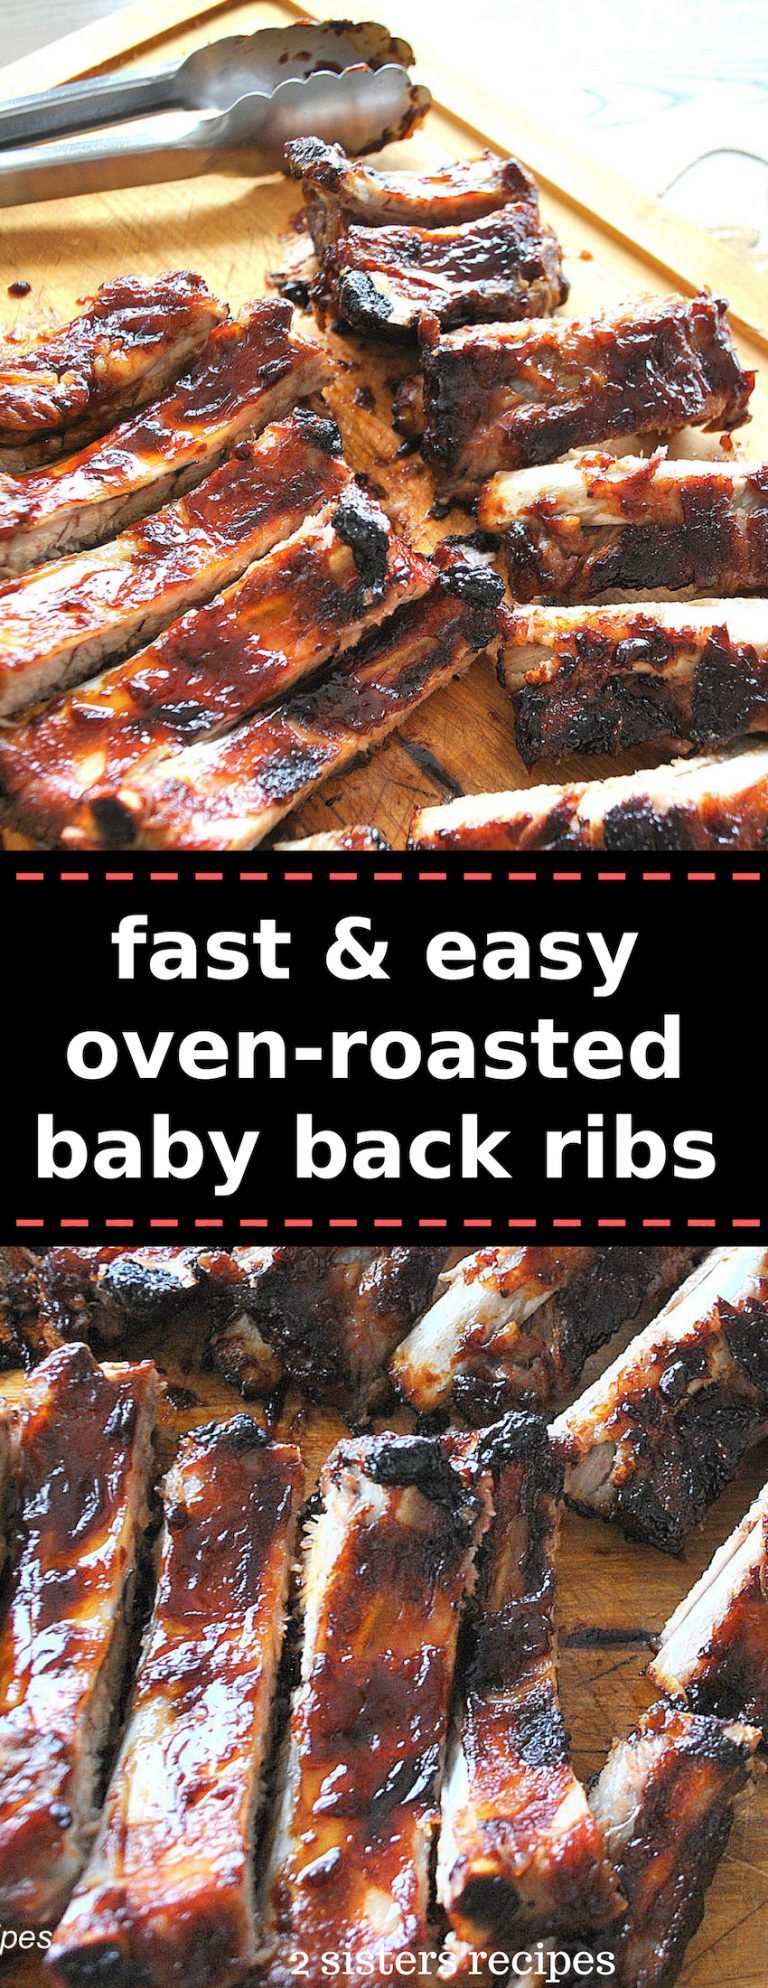 Fast & Easy Oven Roasted Baby Back Ribs - 2 Sisters Recipes by Anna and Liz